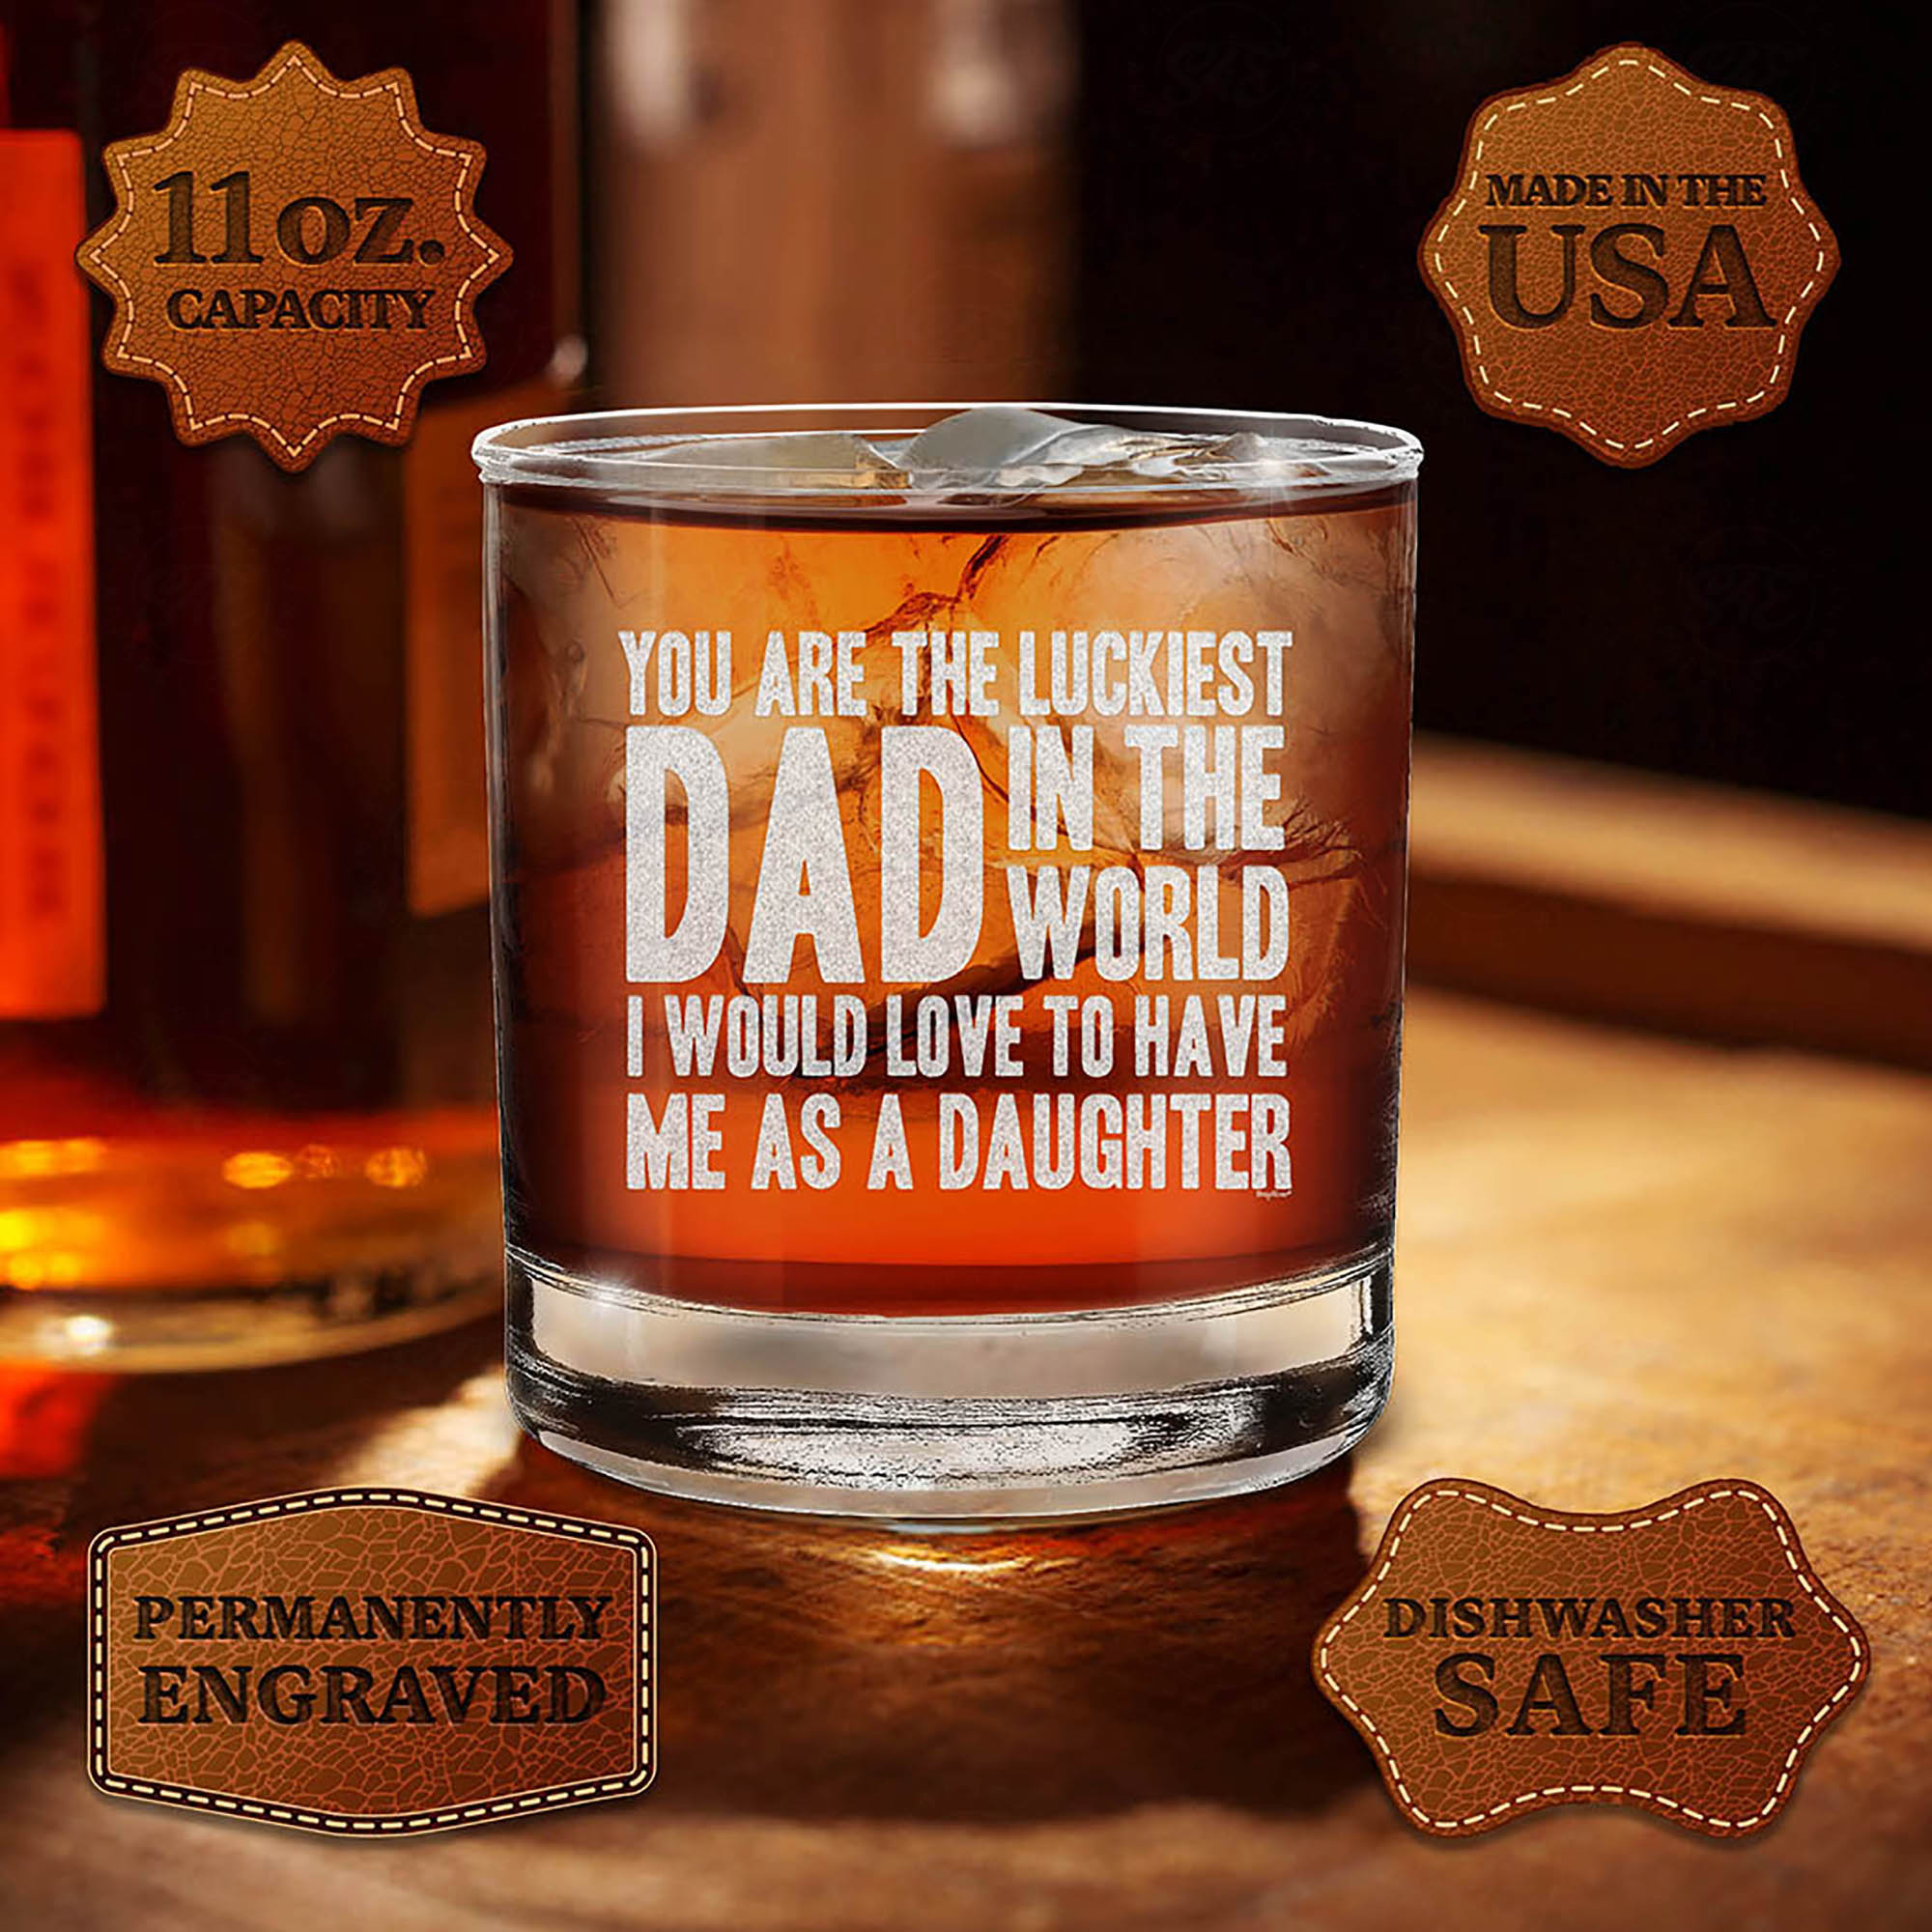 You Are The Luckiest Dad In The World I Would Love To Have Me As A Daughter Engraved Whiskey Glass Funny Father's Day Gift From Daughter (Daughter)